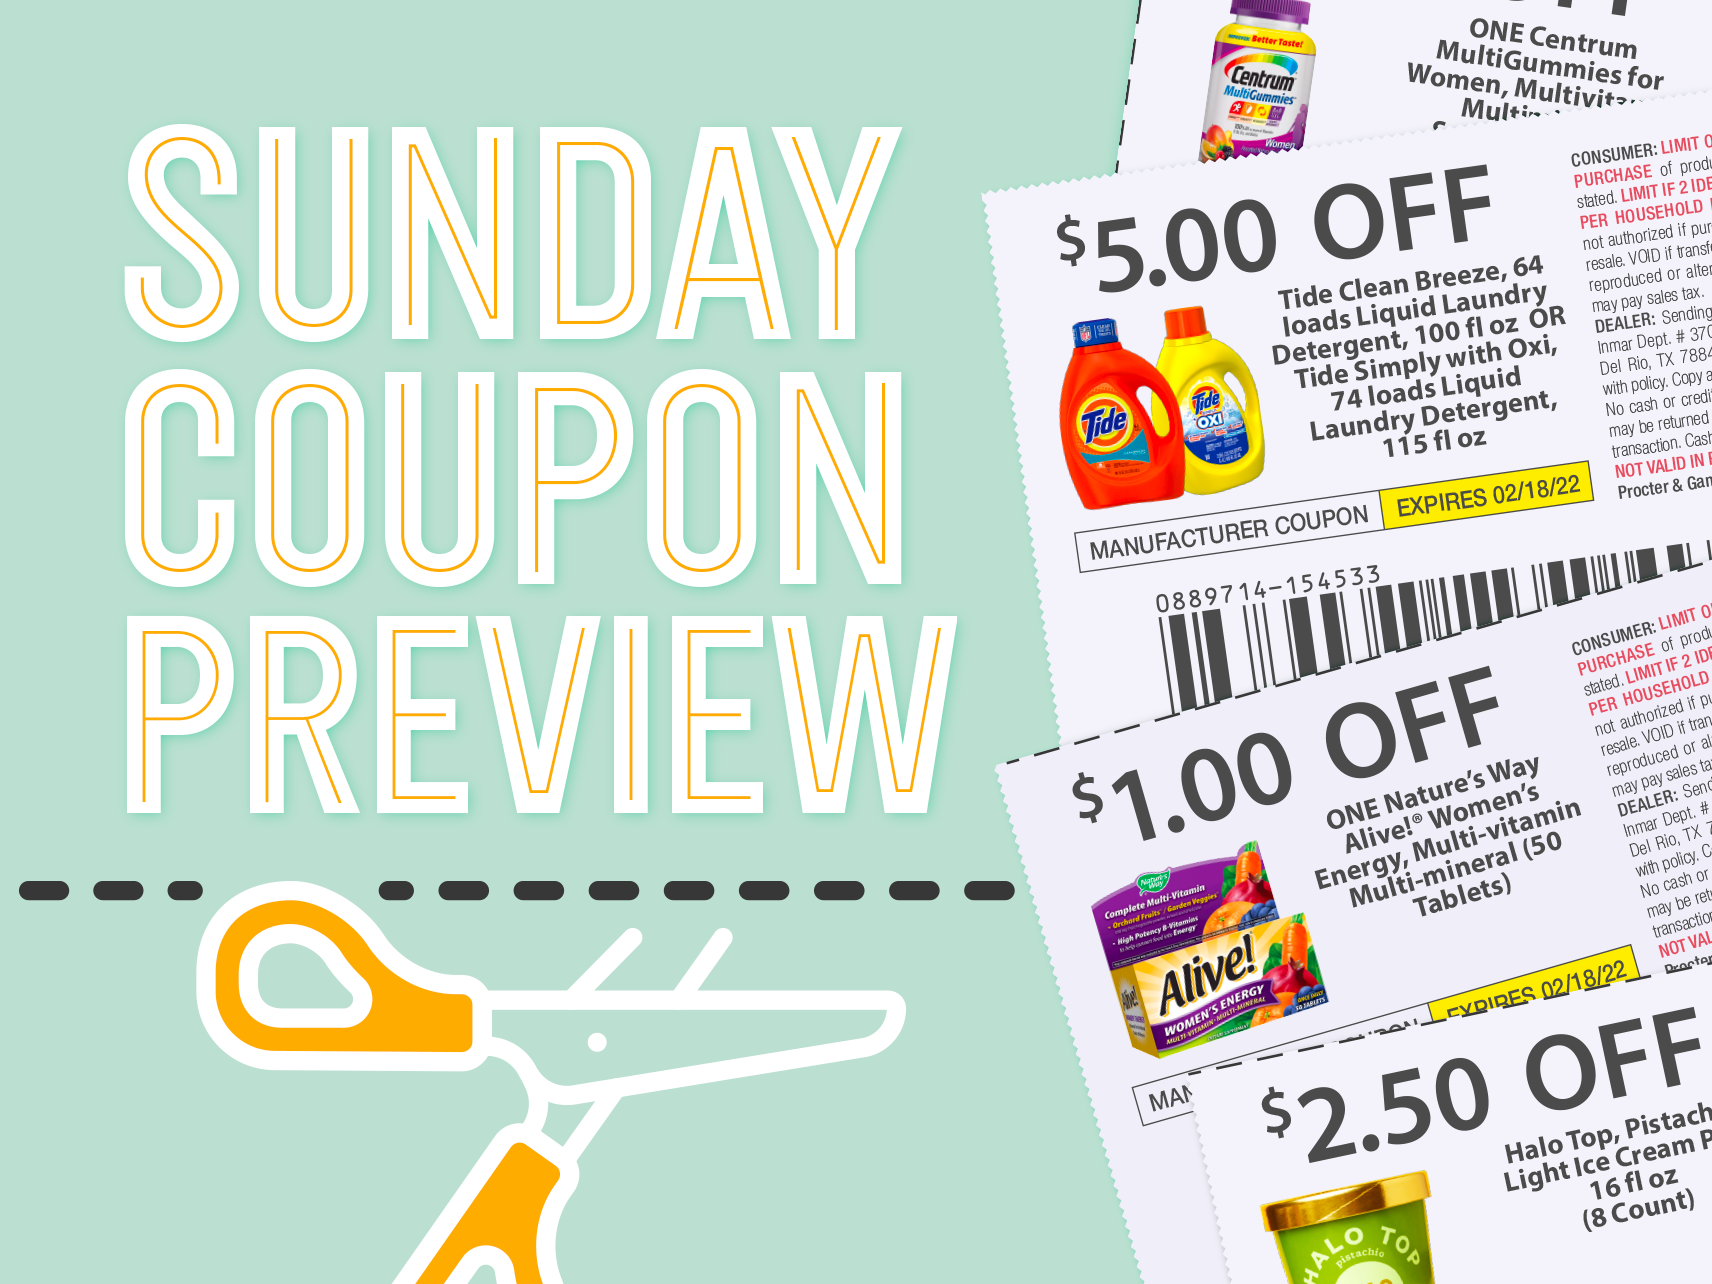 Sunday Coupon Preview For 10/30 – Two Inserts